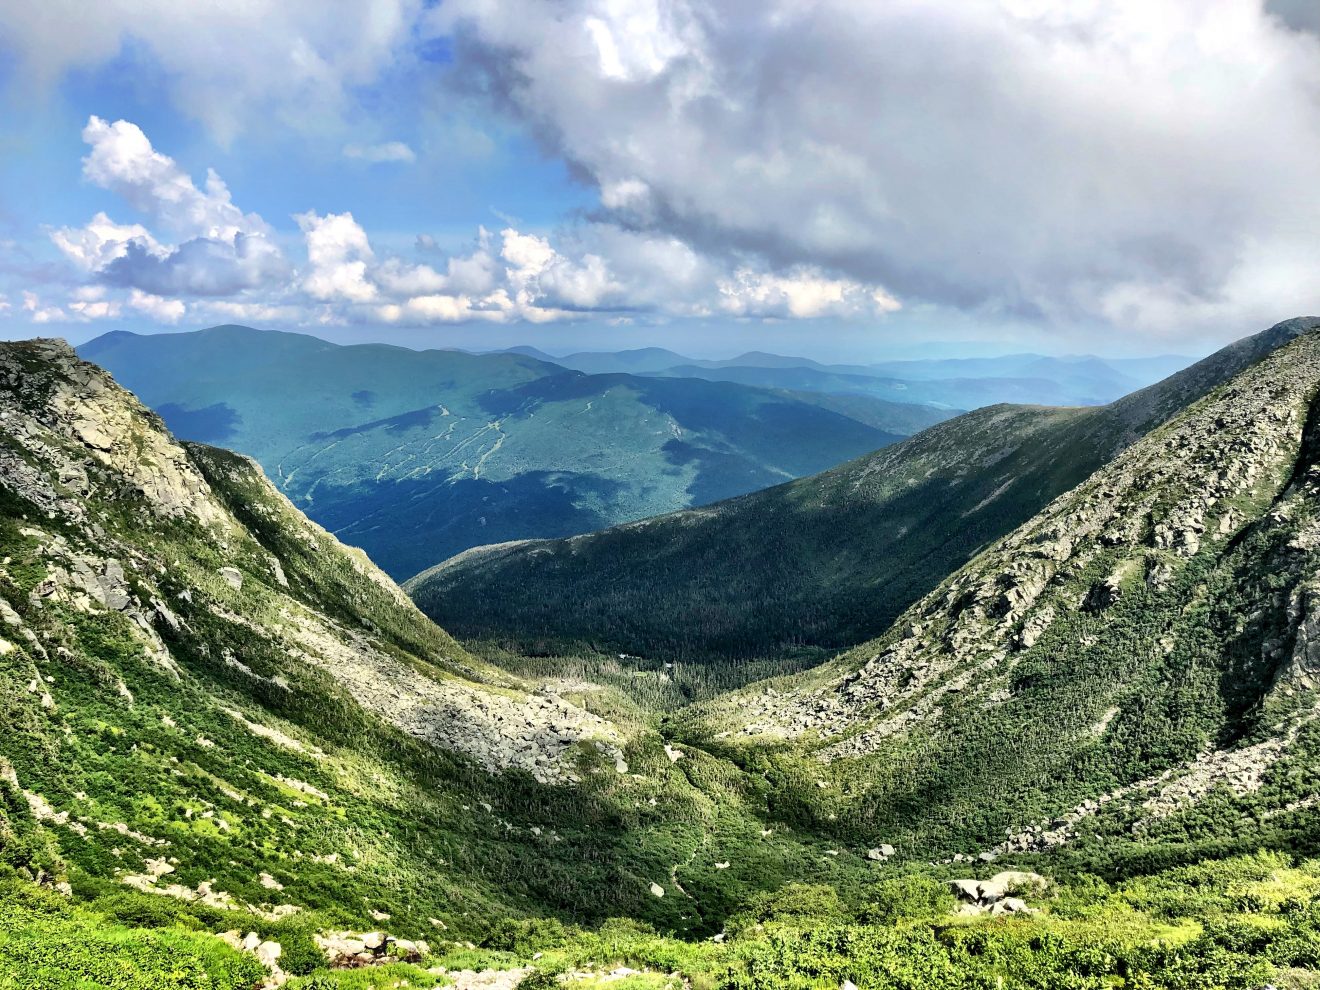 Looking down Tuckerman's Ravine in the White Mountains in New Hampshire